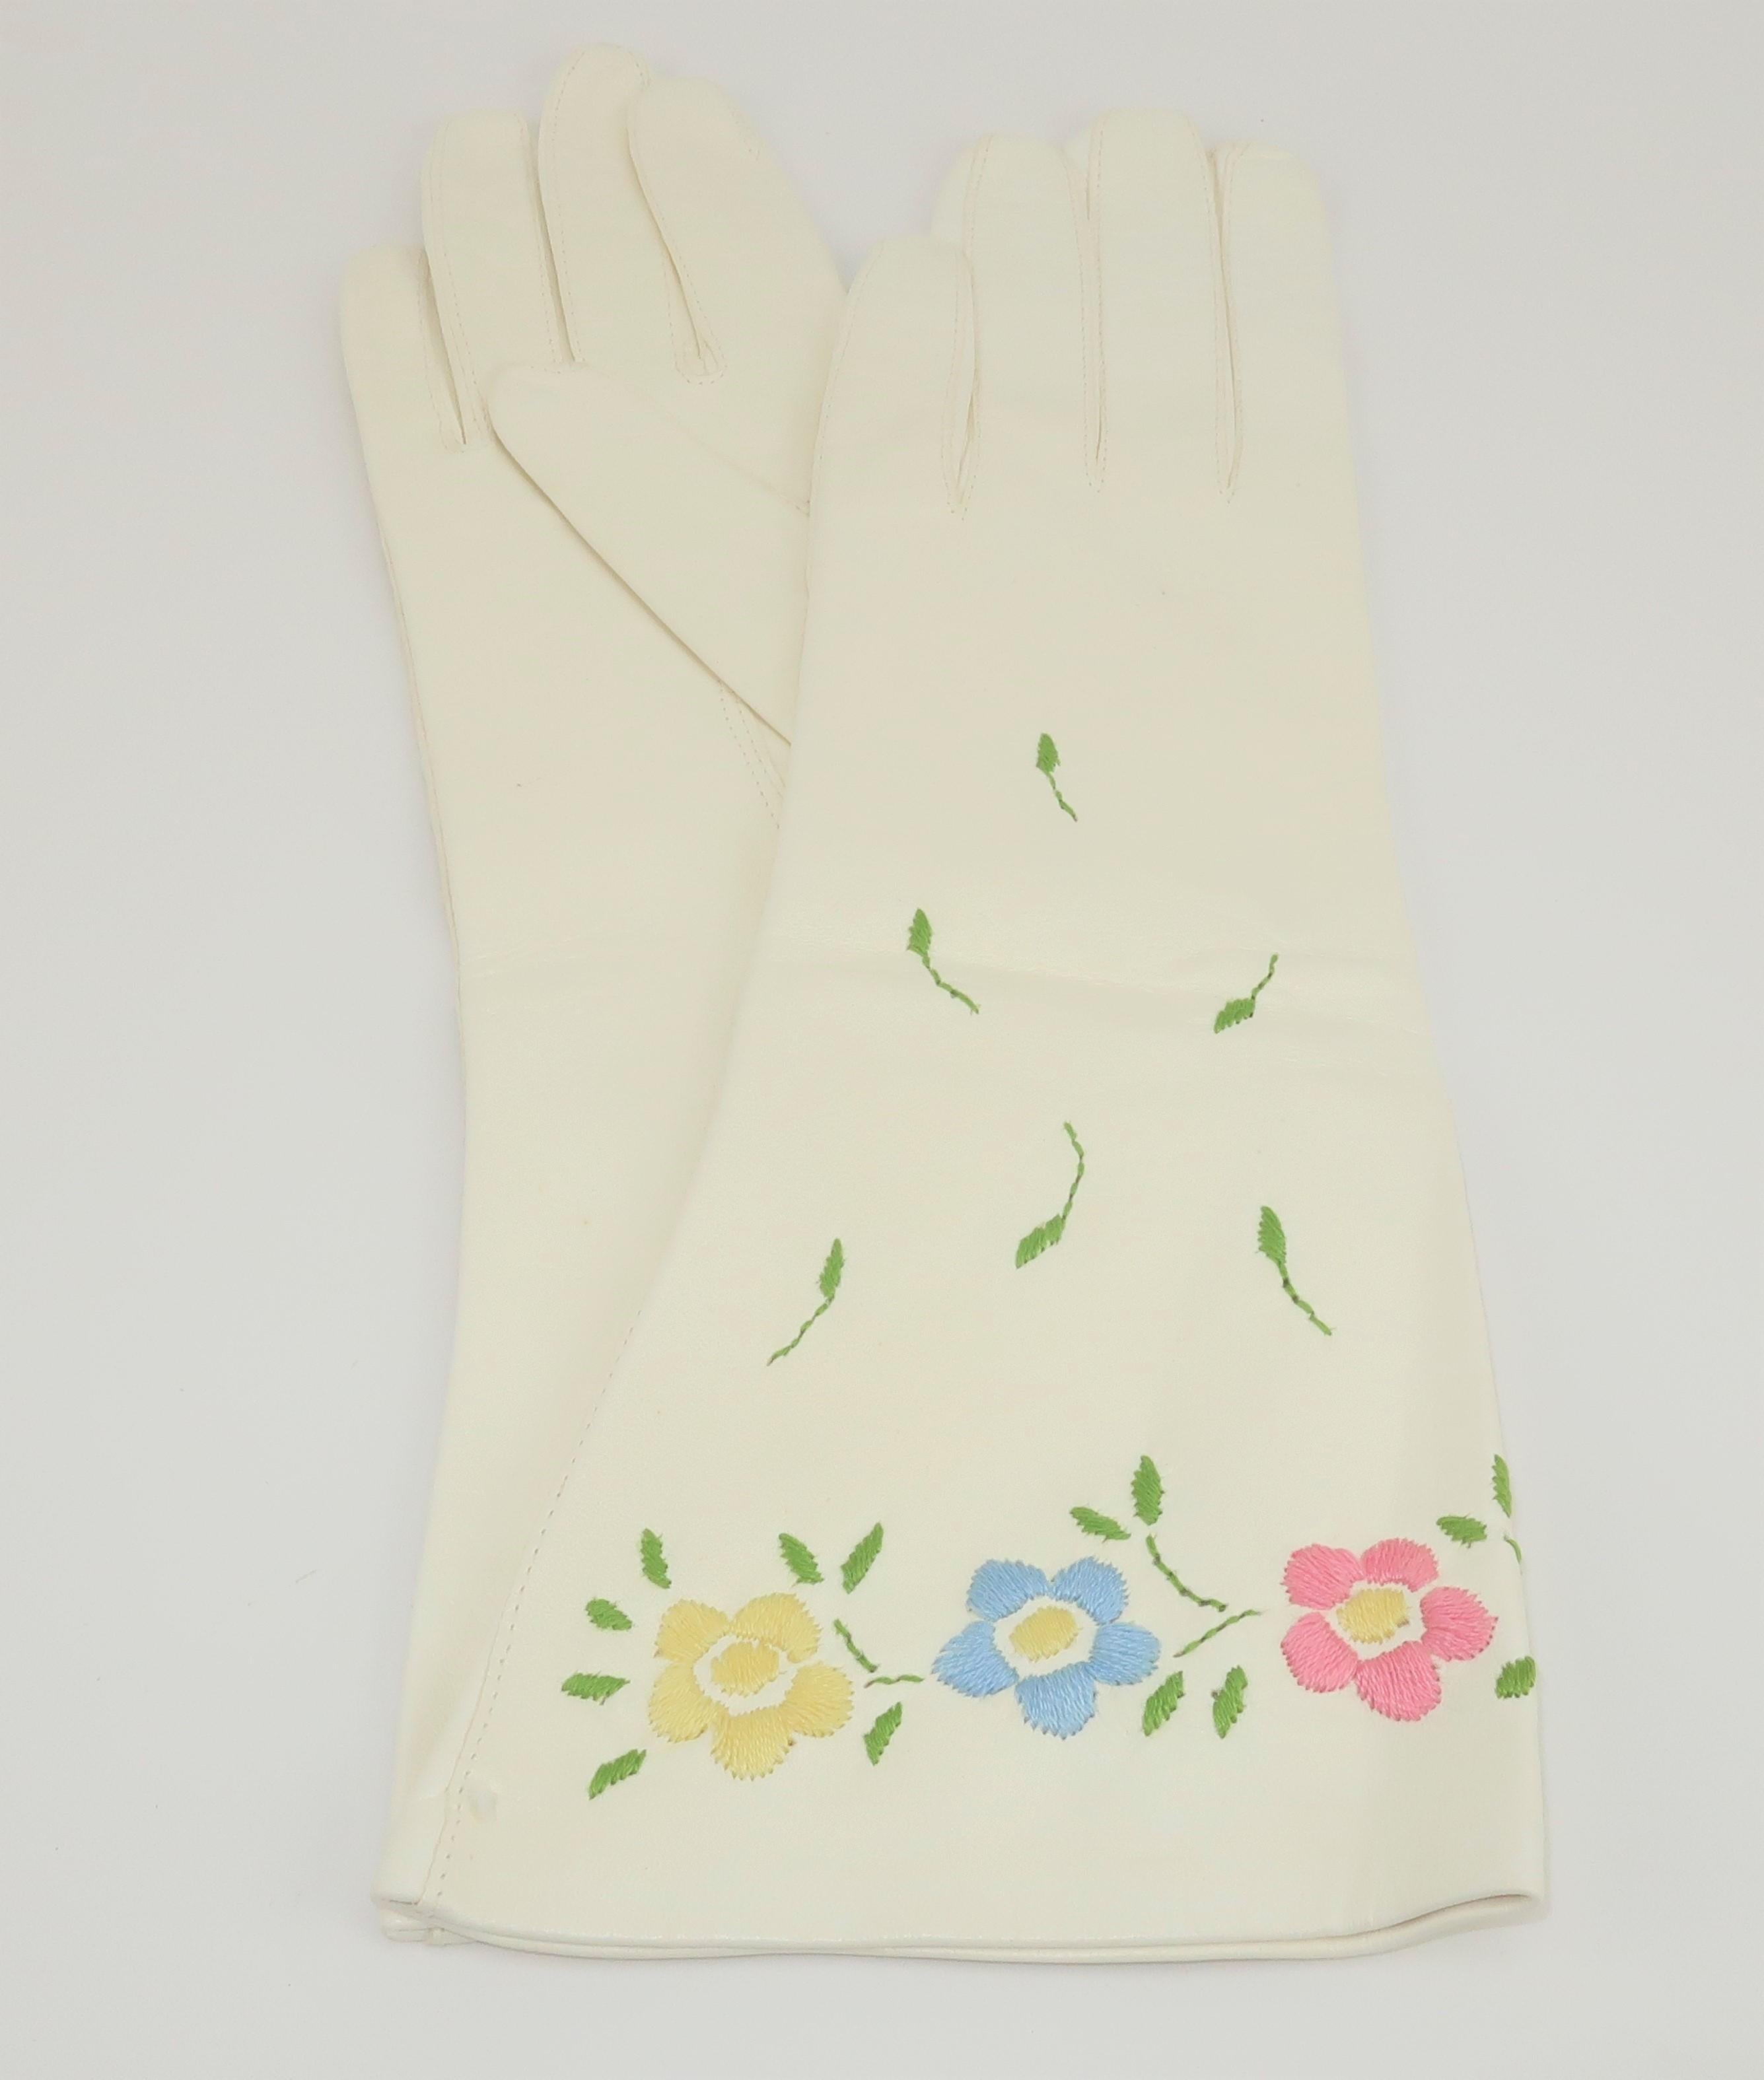 Lovely 1950's Italian white leather gloves with pastel floral embroidery in shades of yellow, blue, pink and green.  The gloves were previously owned though never worn with a manufacturers stitch remaining intact at the cuff.  An elegant Spring and